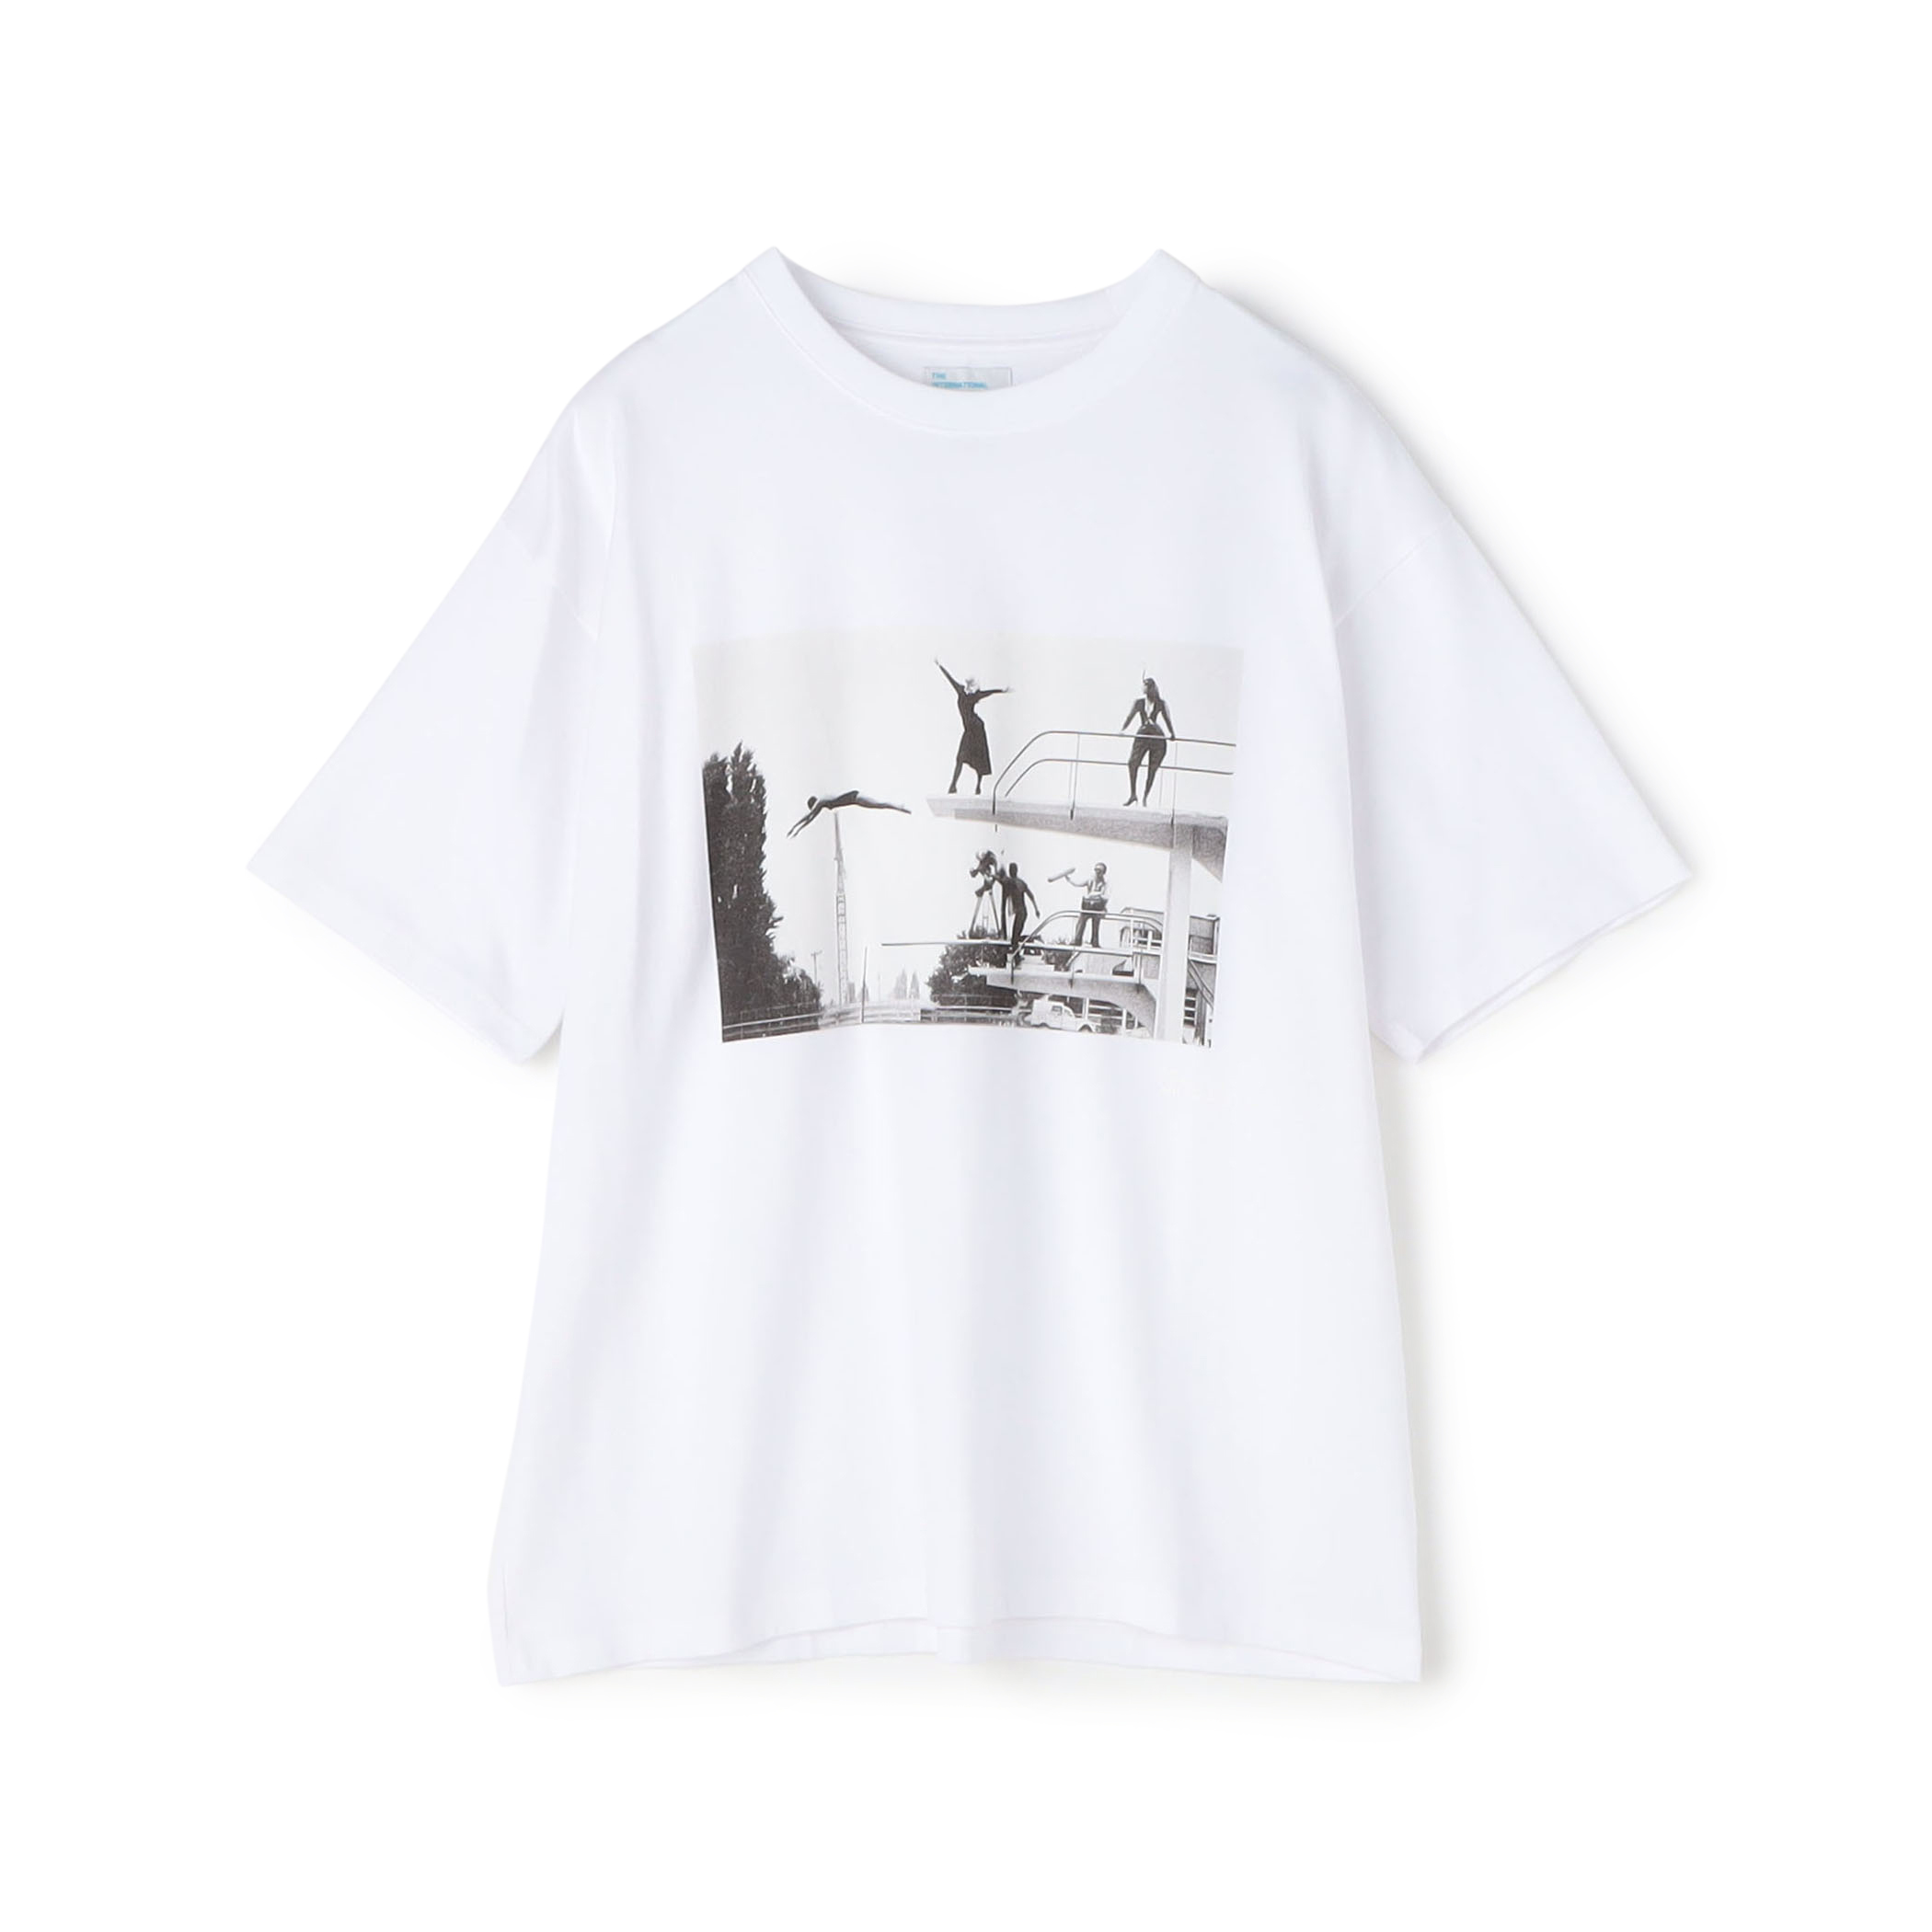 THE INTERNATIONAL IMAGES COLLECTION プリントTシャツ ...